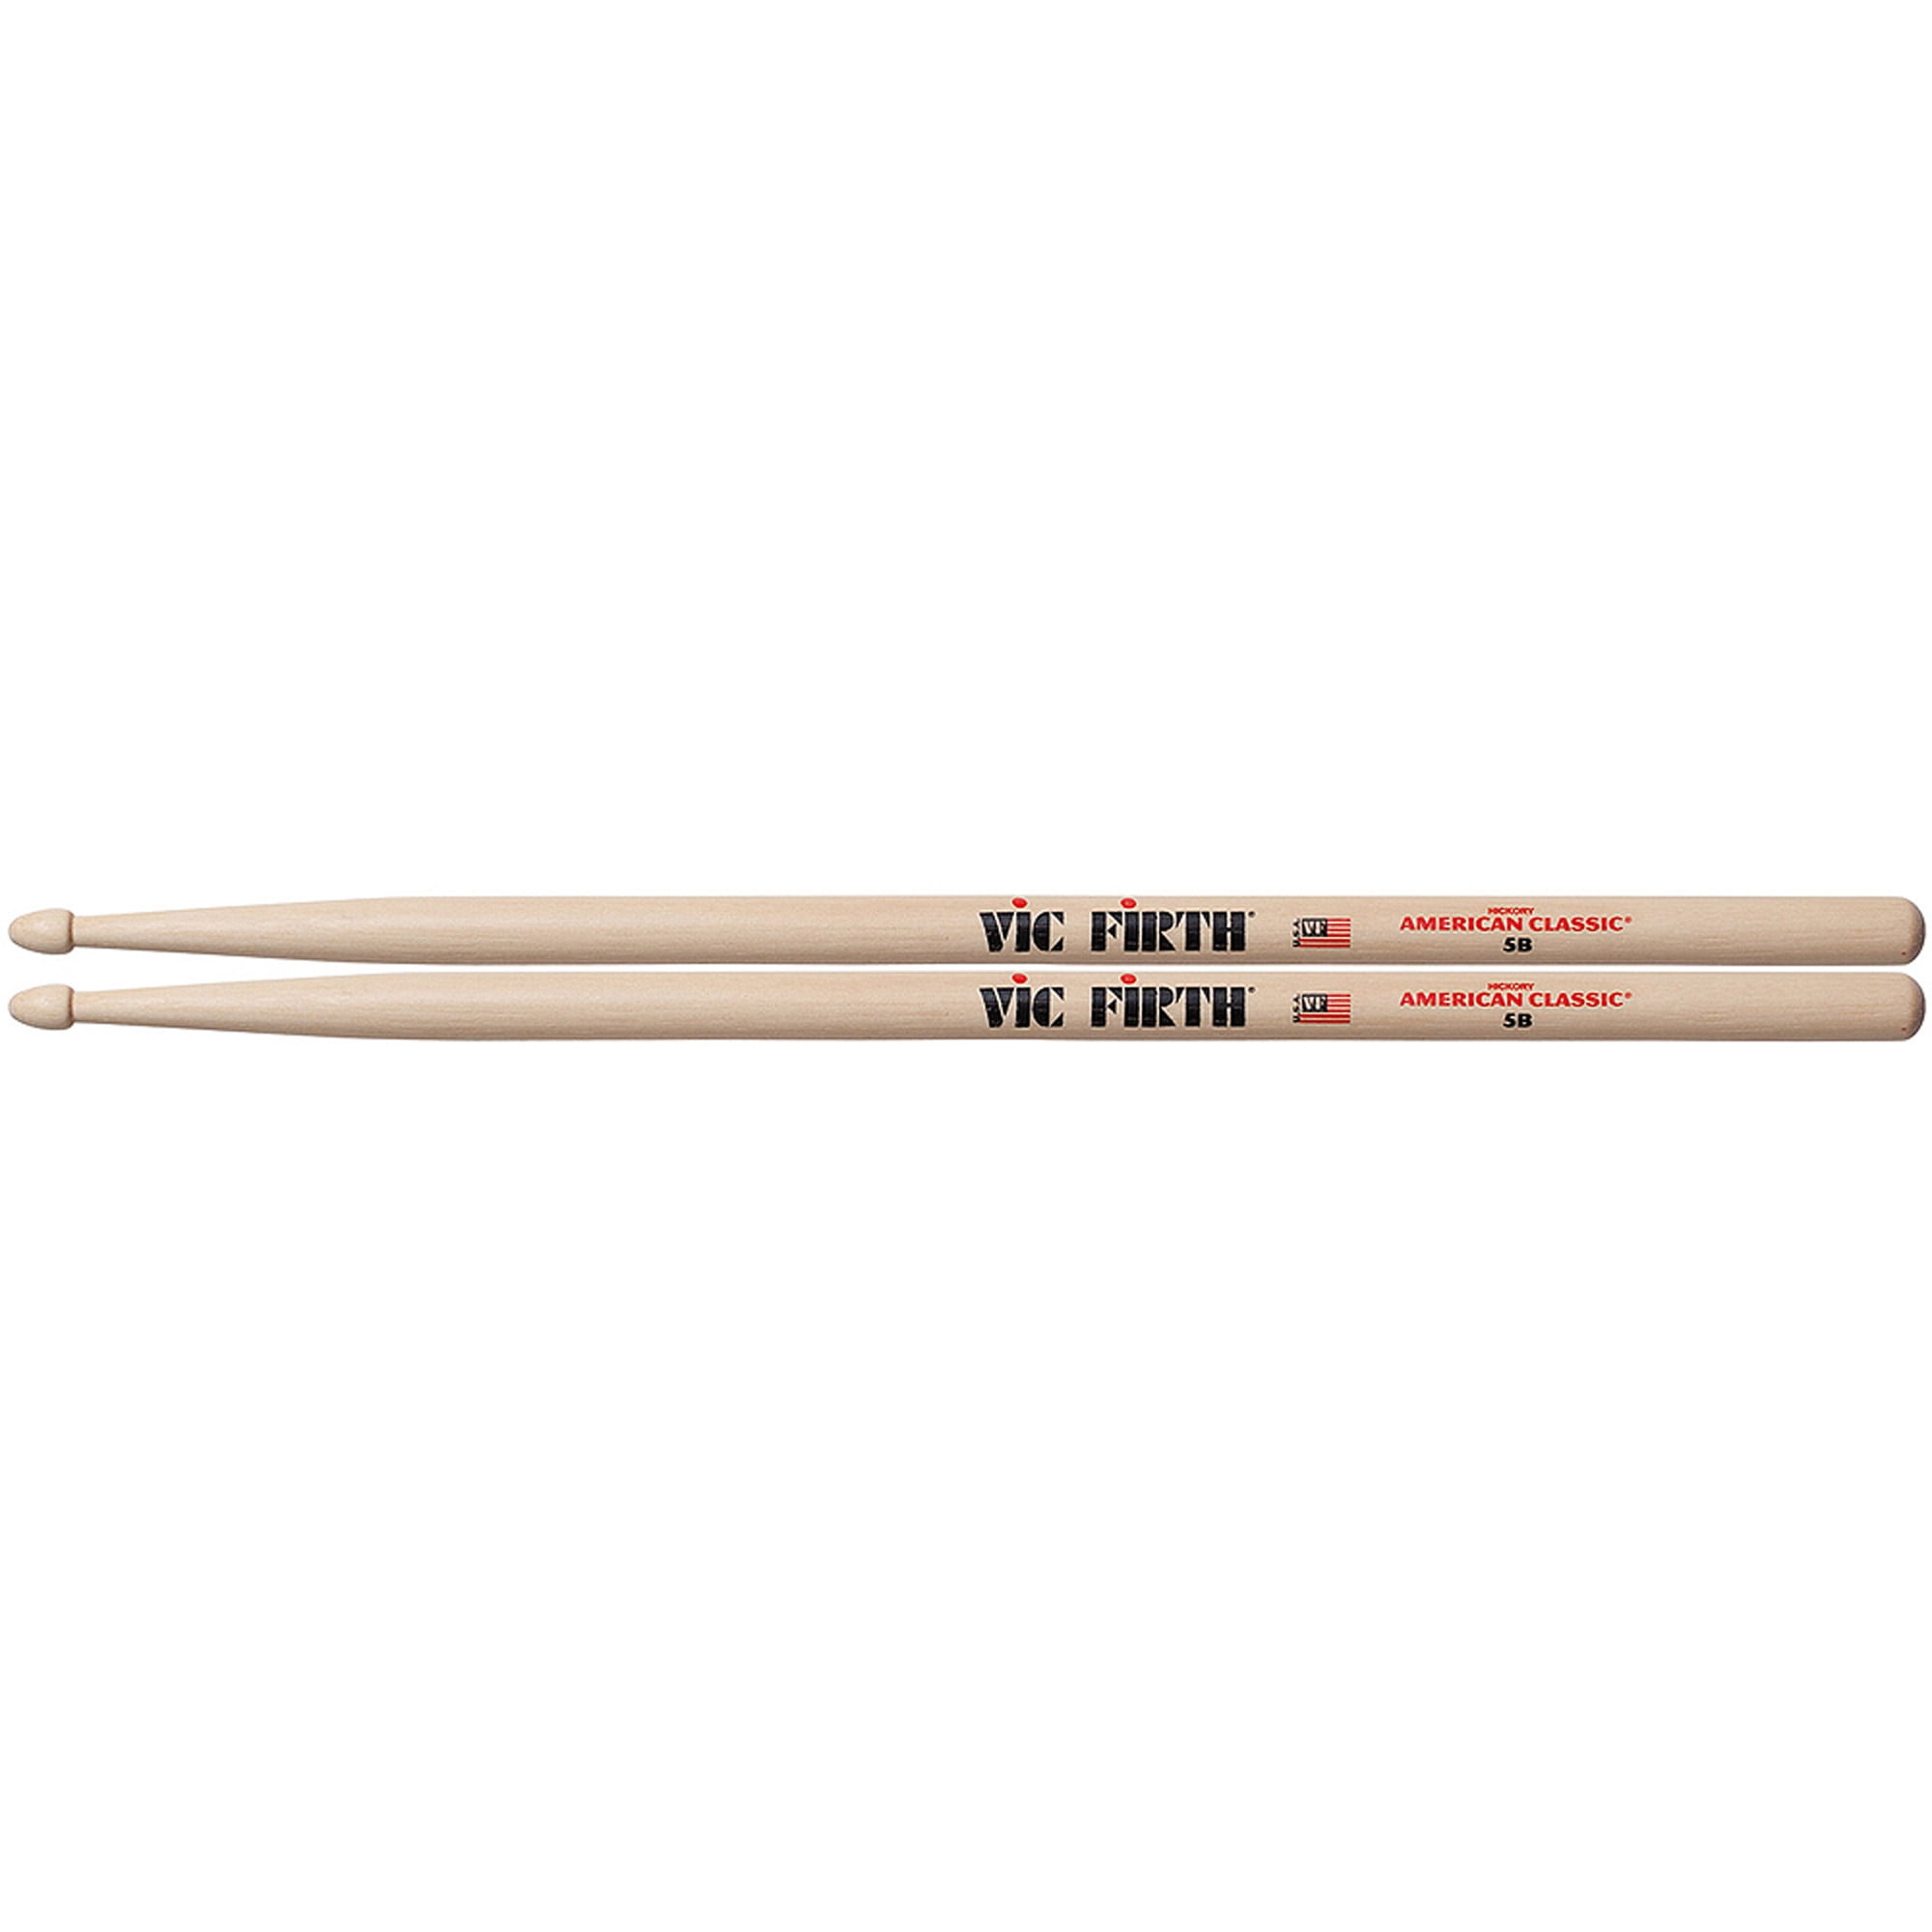 3 PAIA VIC FIRTH AMERICAN CLASSIC HICKORY 5bn 5b CHIAVETTE nylon sparpack * 